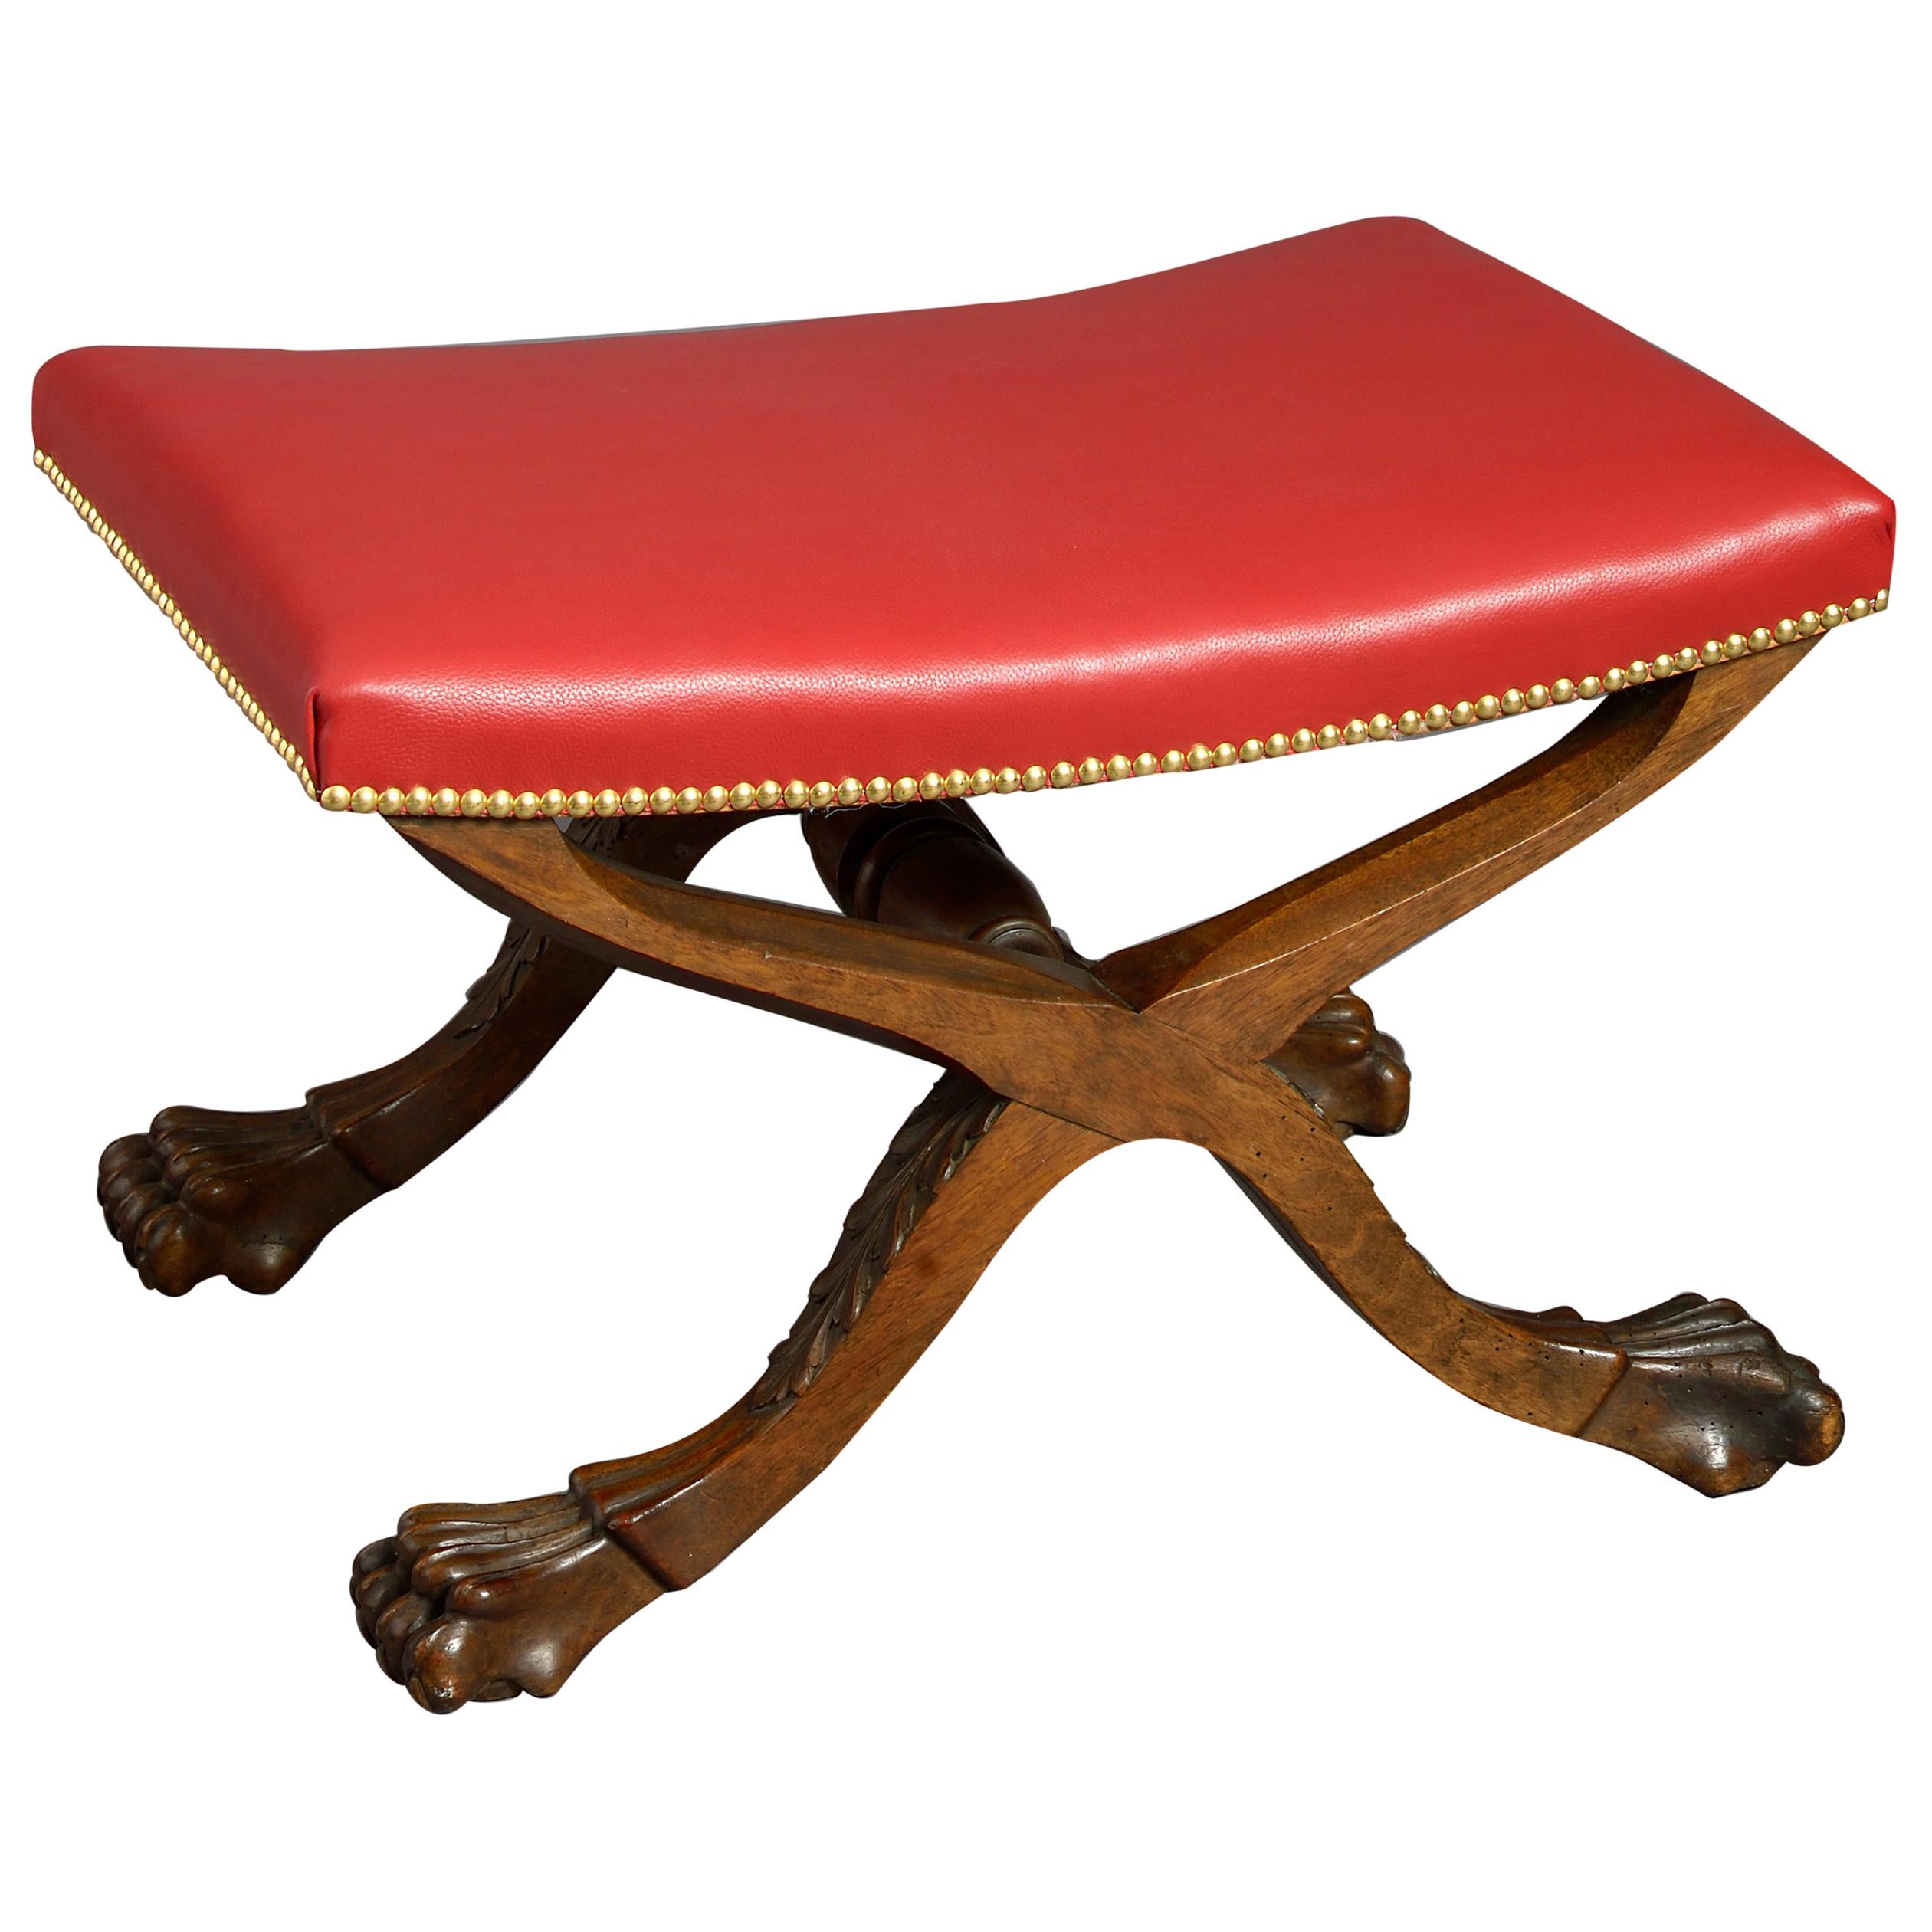 19th Century Carved Walnut X-Frame Stool with Red Leather Seat